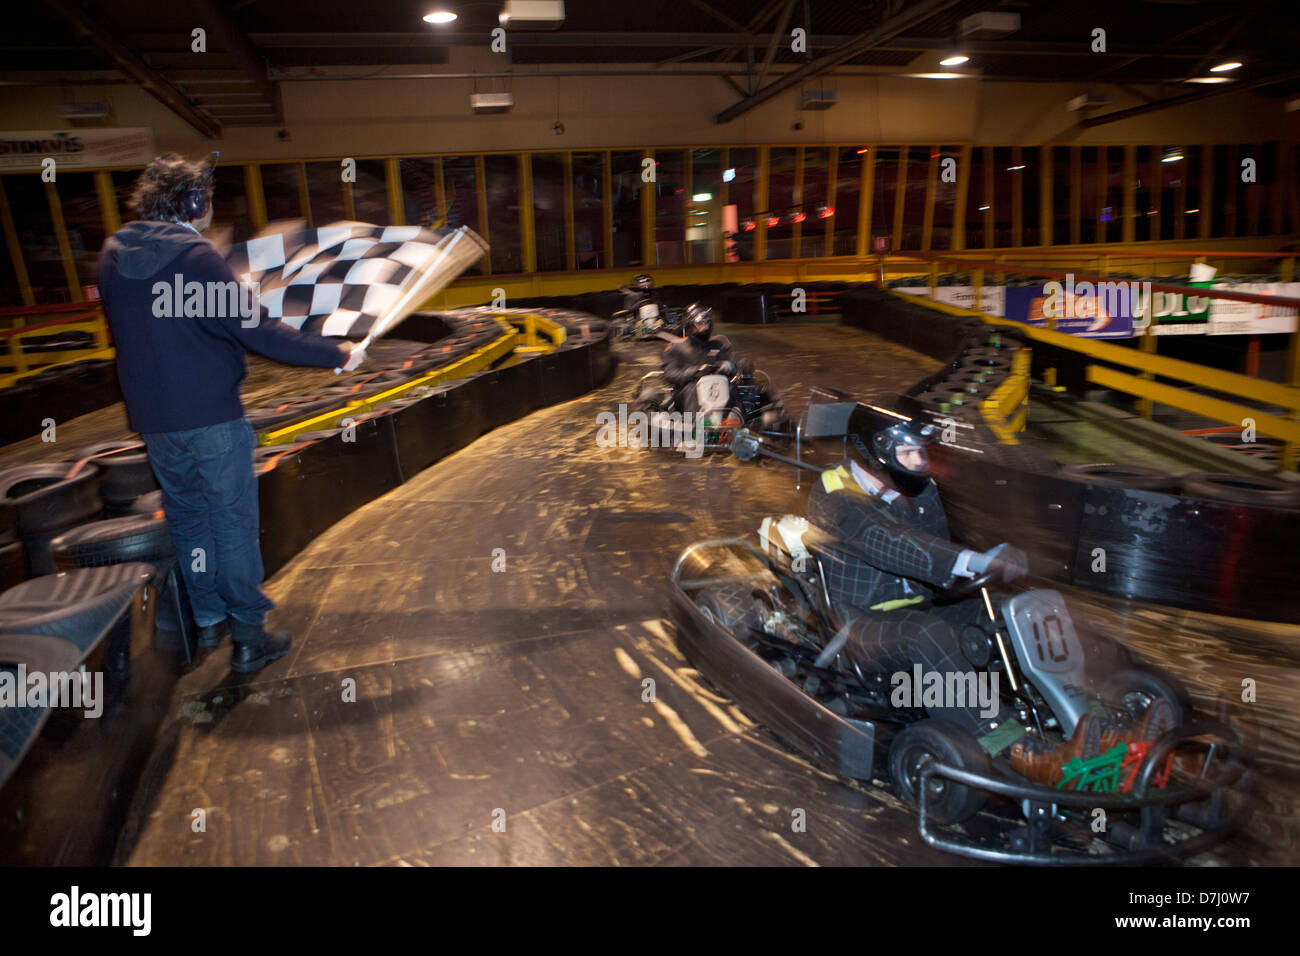 Carting at Go-kart-in in dordrecht, holland Stock Photo